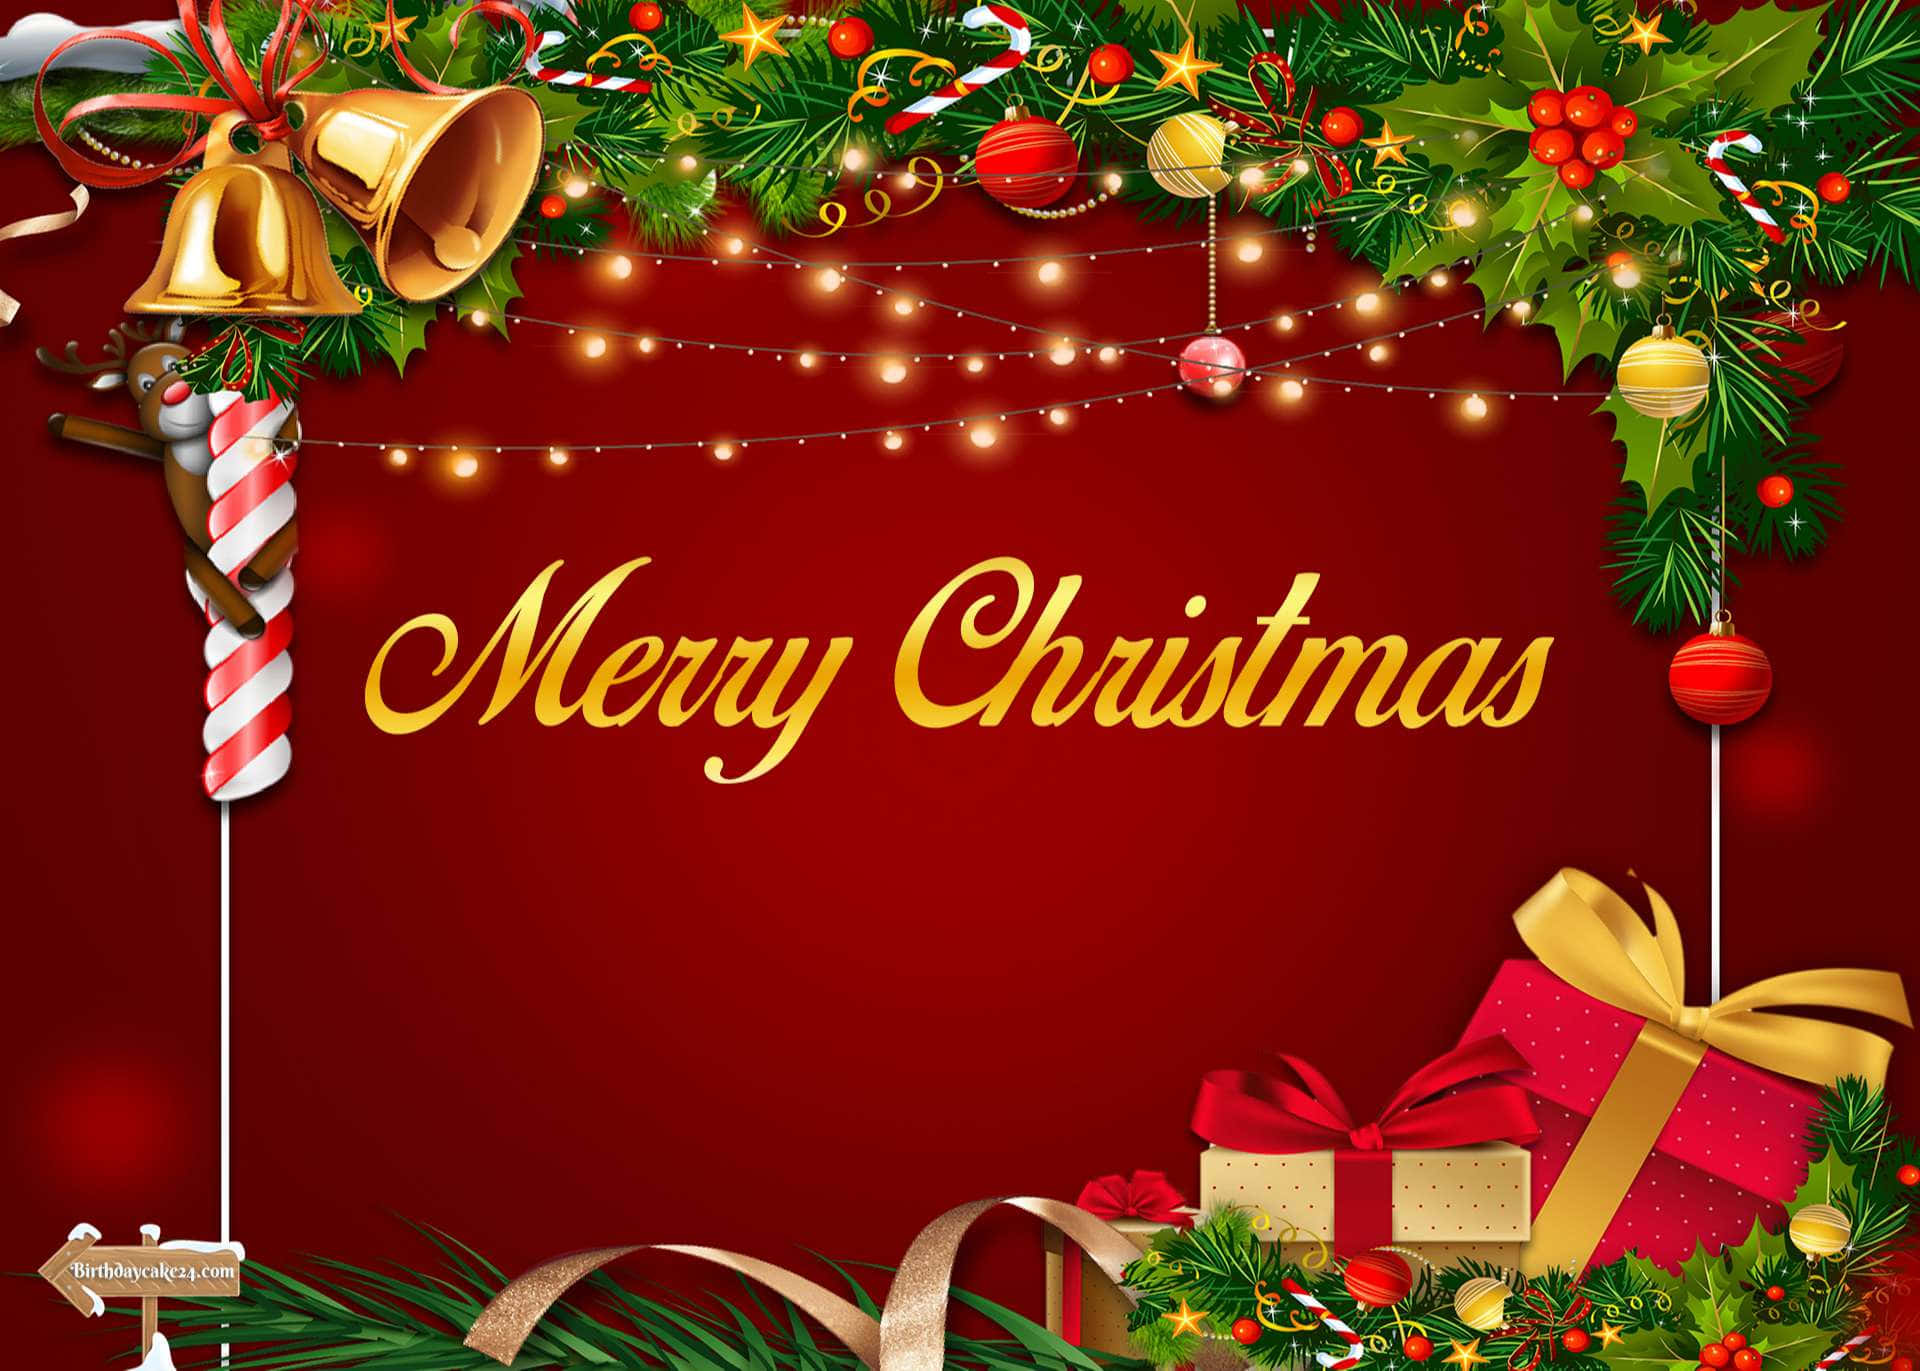 Celebrate Christmas with a Sparkling High Resolution Background